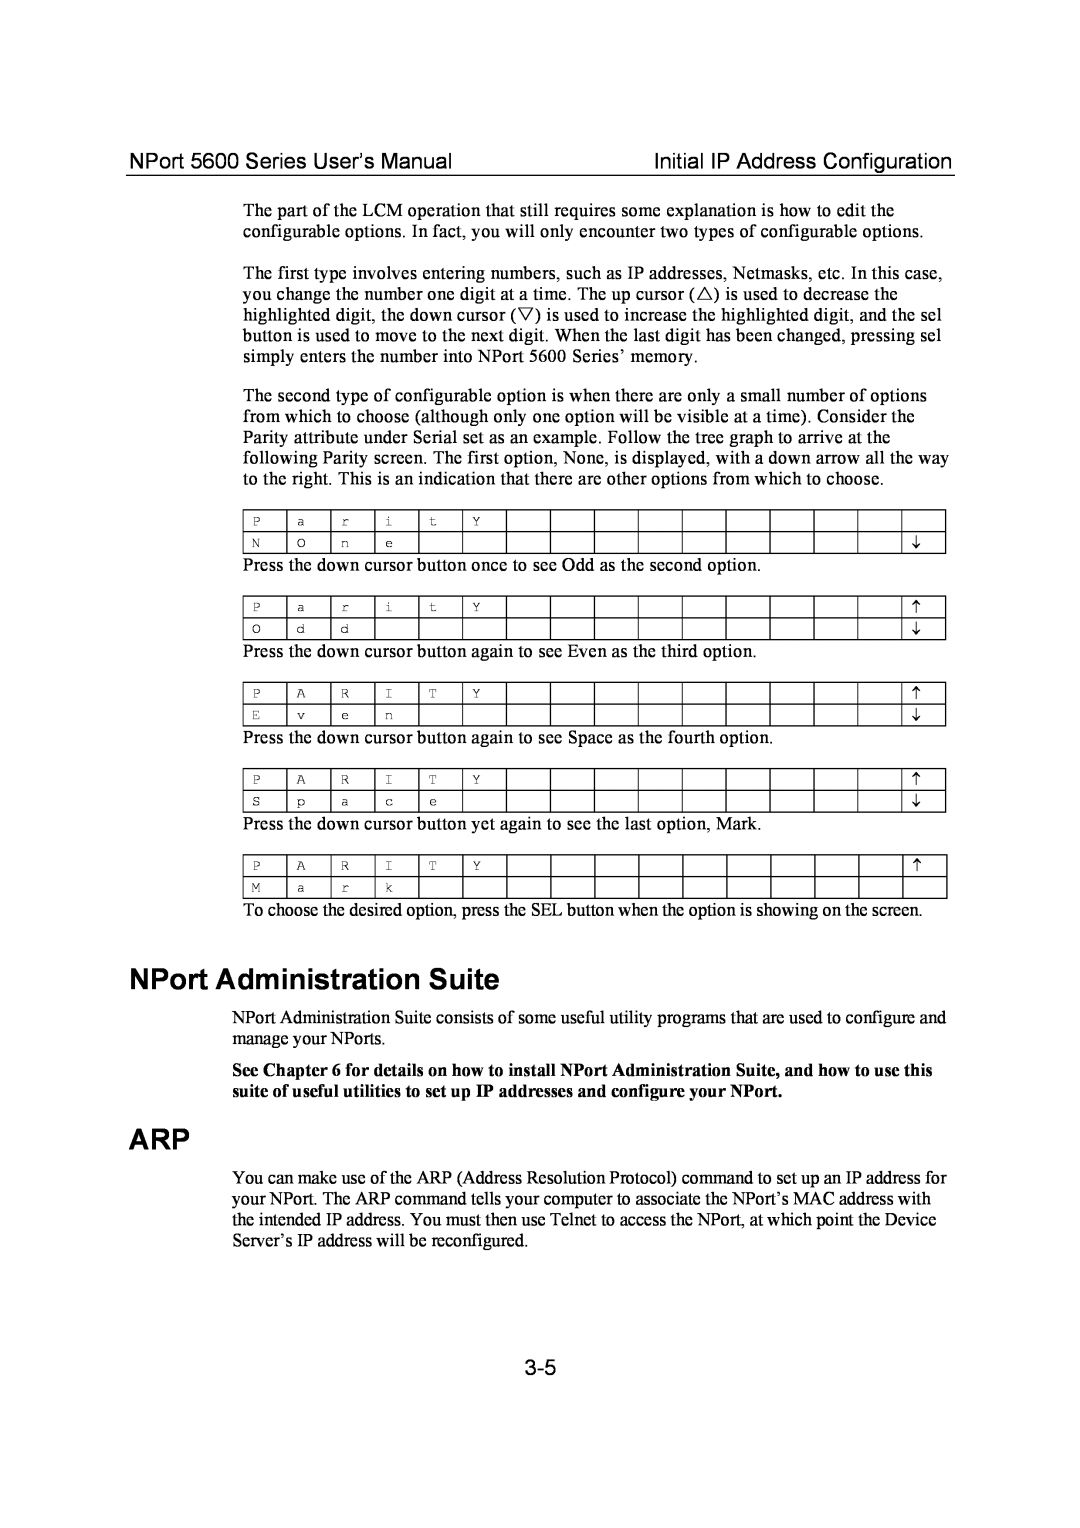 Moxa Technologies NPort Administration Suite, NPort 5600 Series User’s Manual, Initial IP Address Configuration 